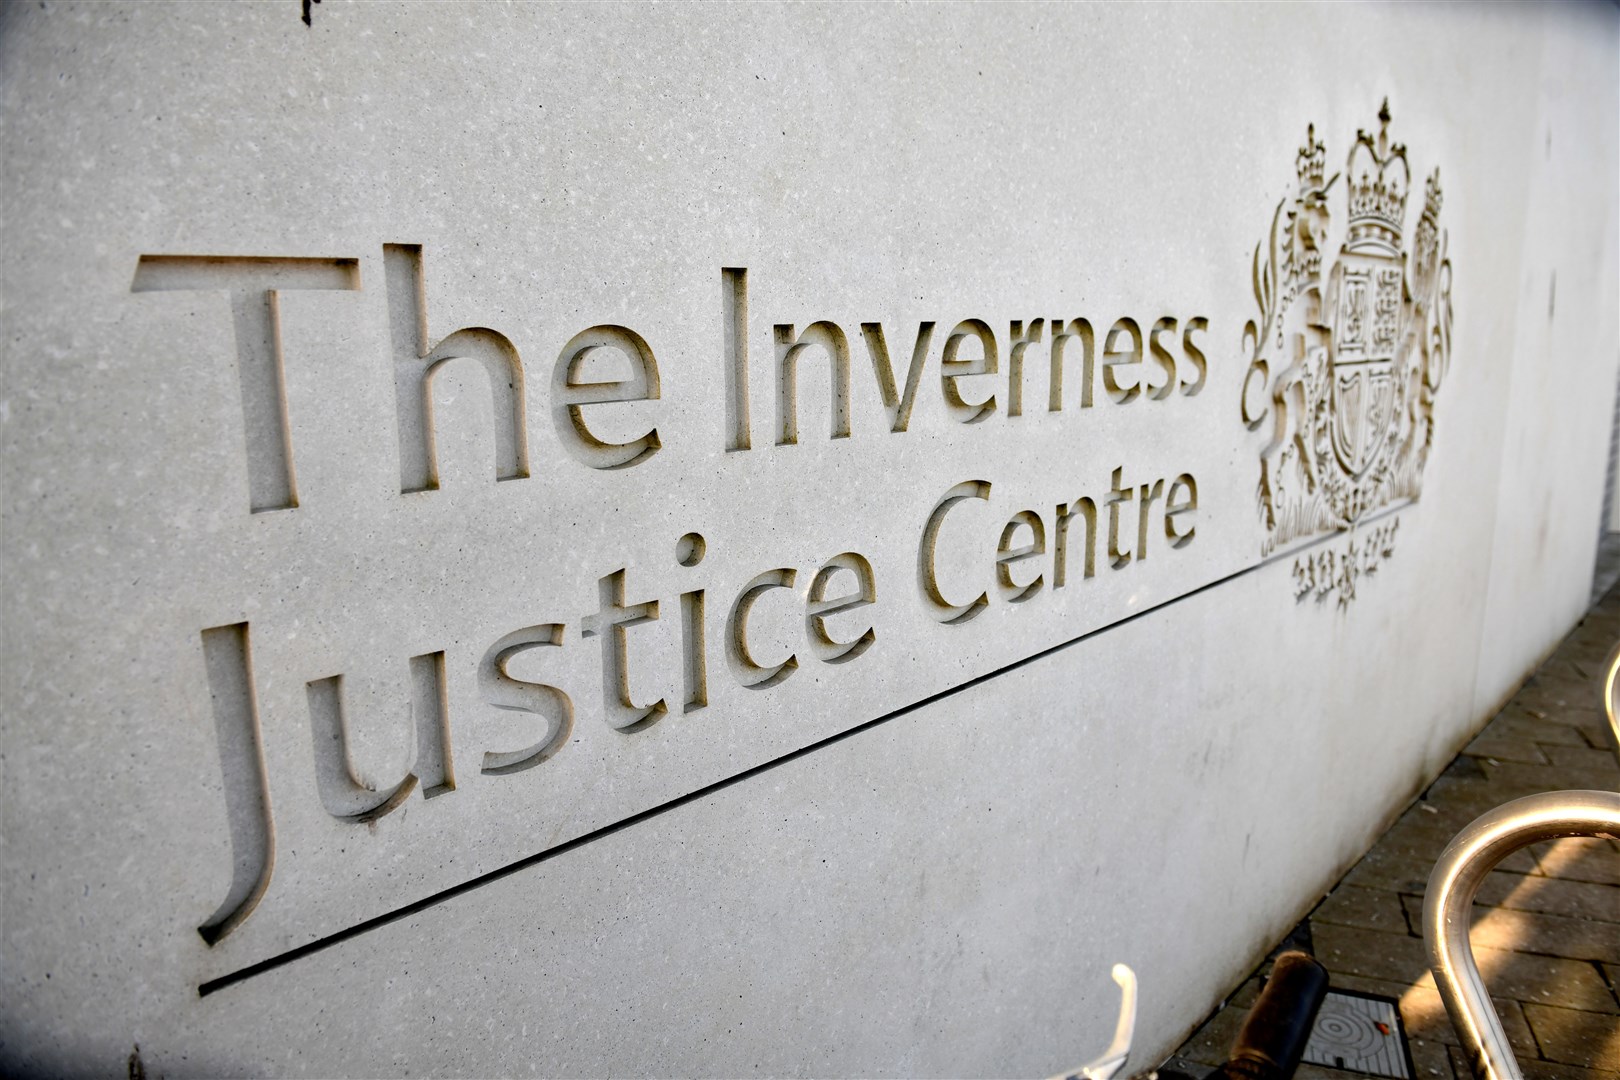 The case was heard at Inverness Justice Centre.